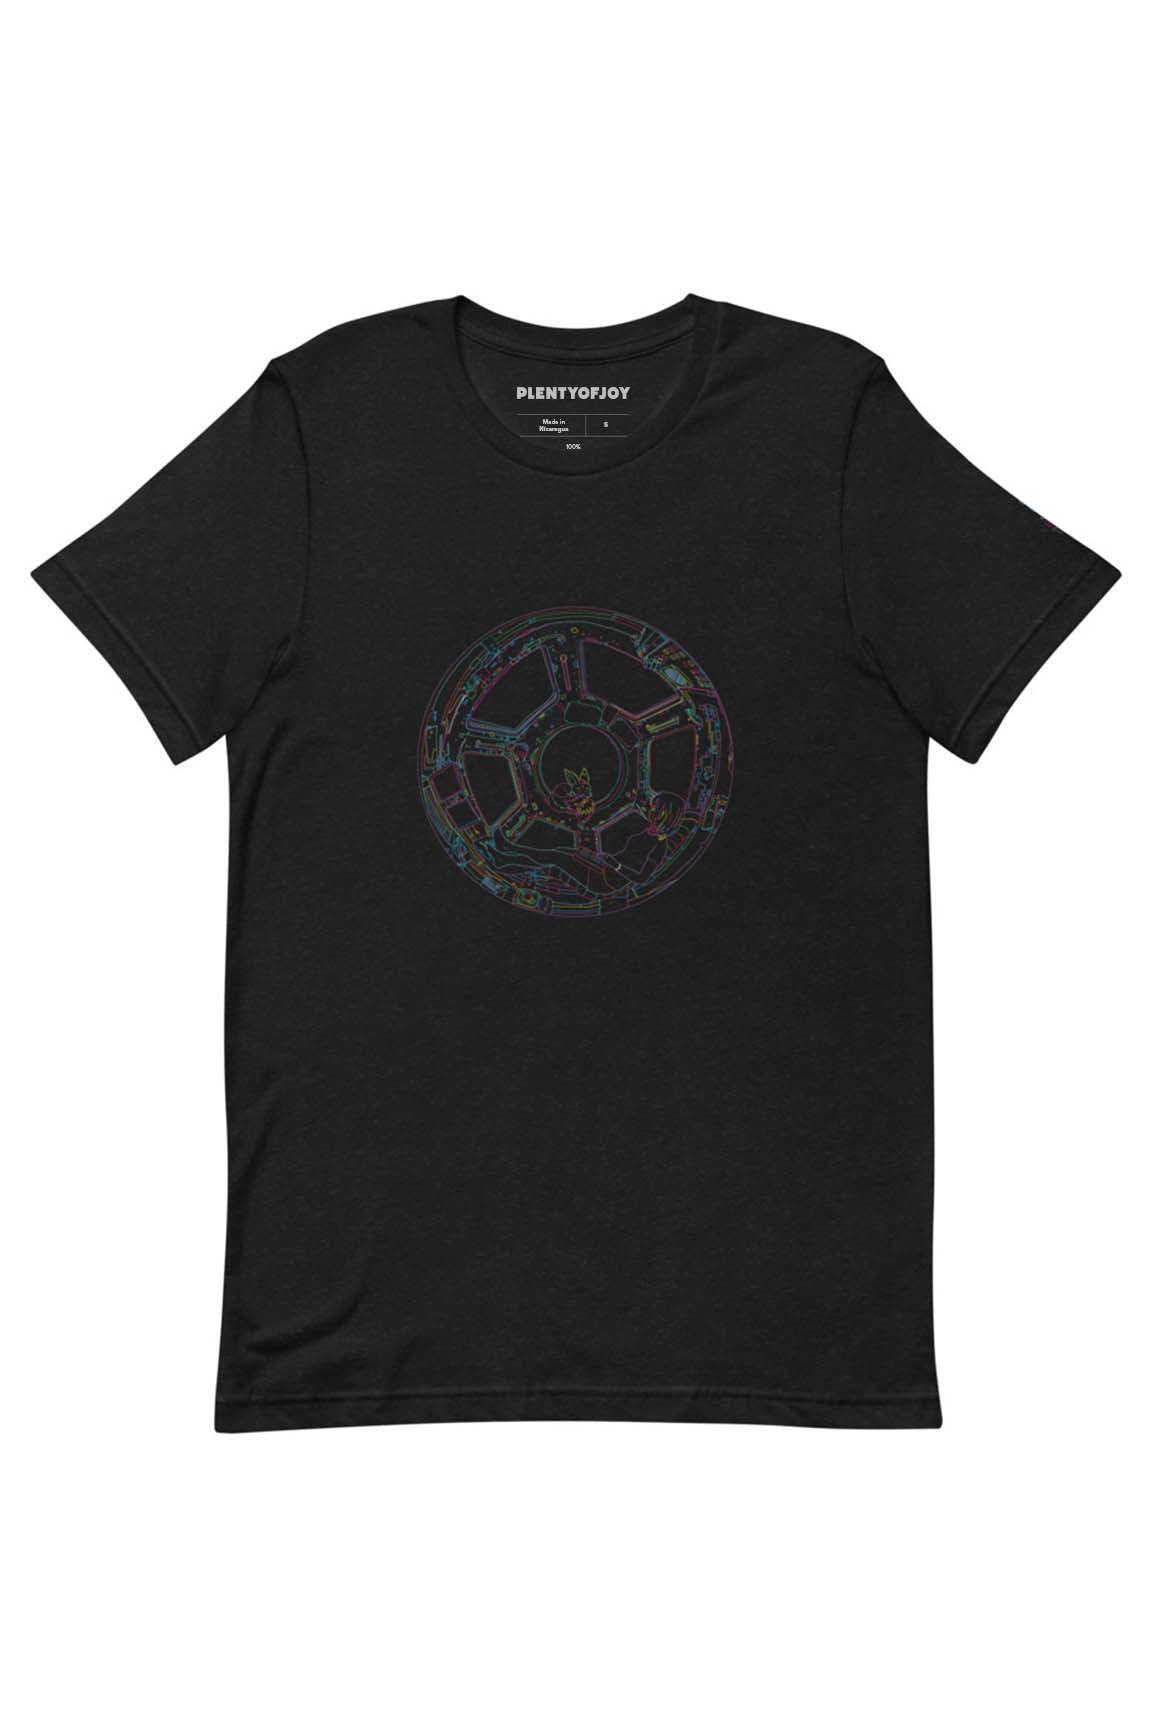 Claire & Lola Space Adventure T-Shirt in Black